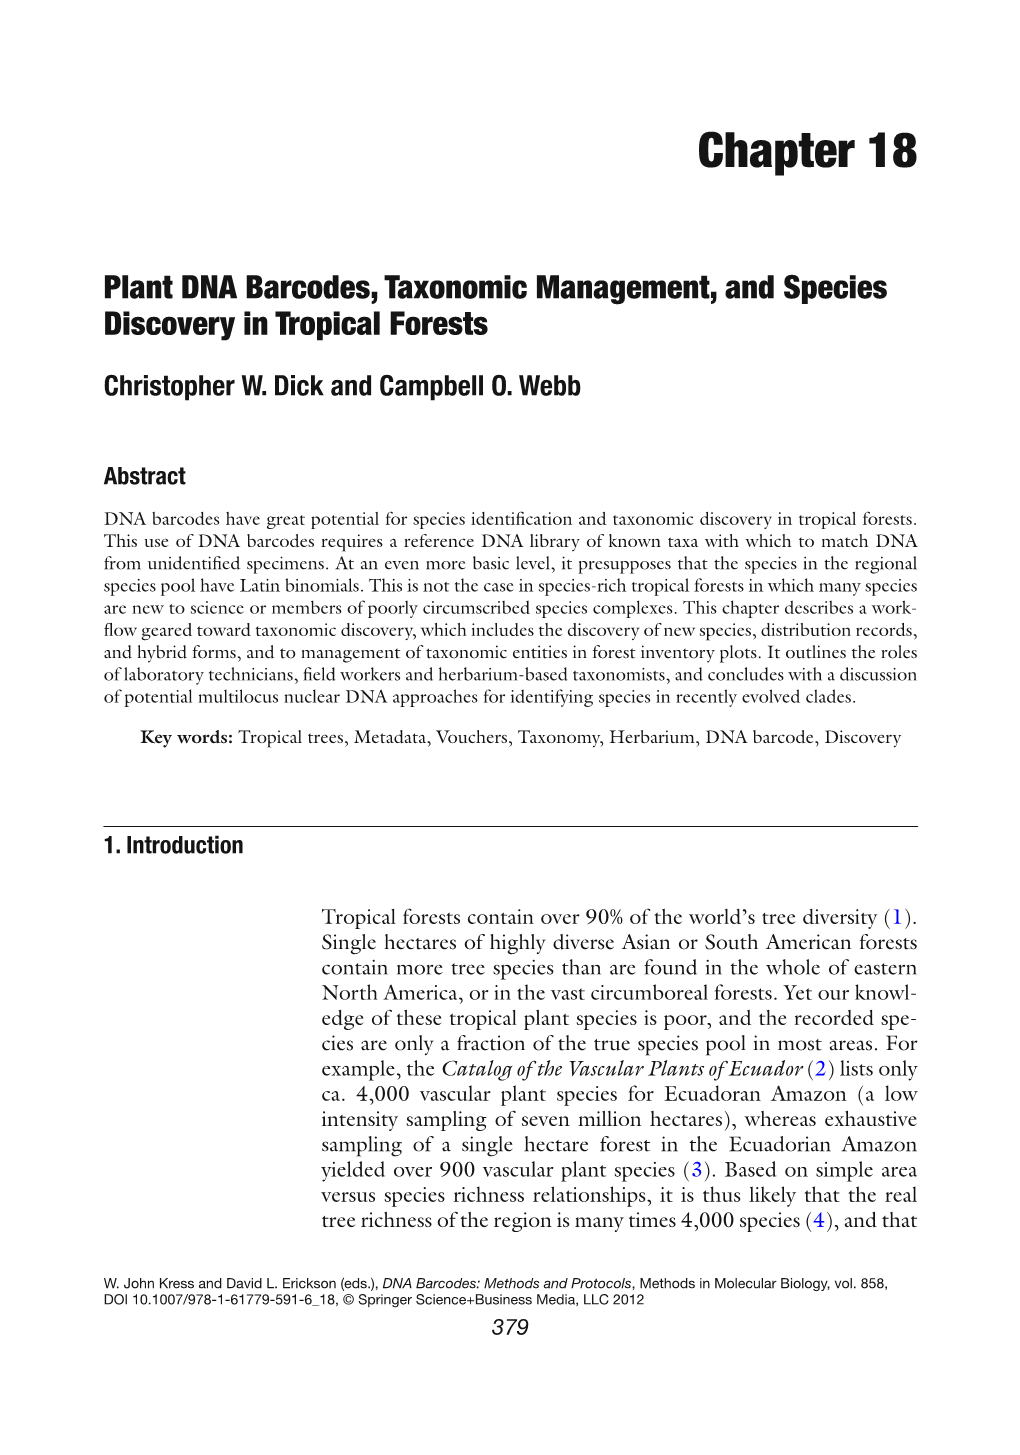 Chapter 18 Plant DNA Barcodes, Taxonomic Management, and Species Discovery in Tropical Forests